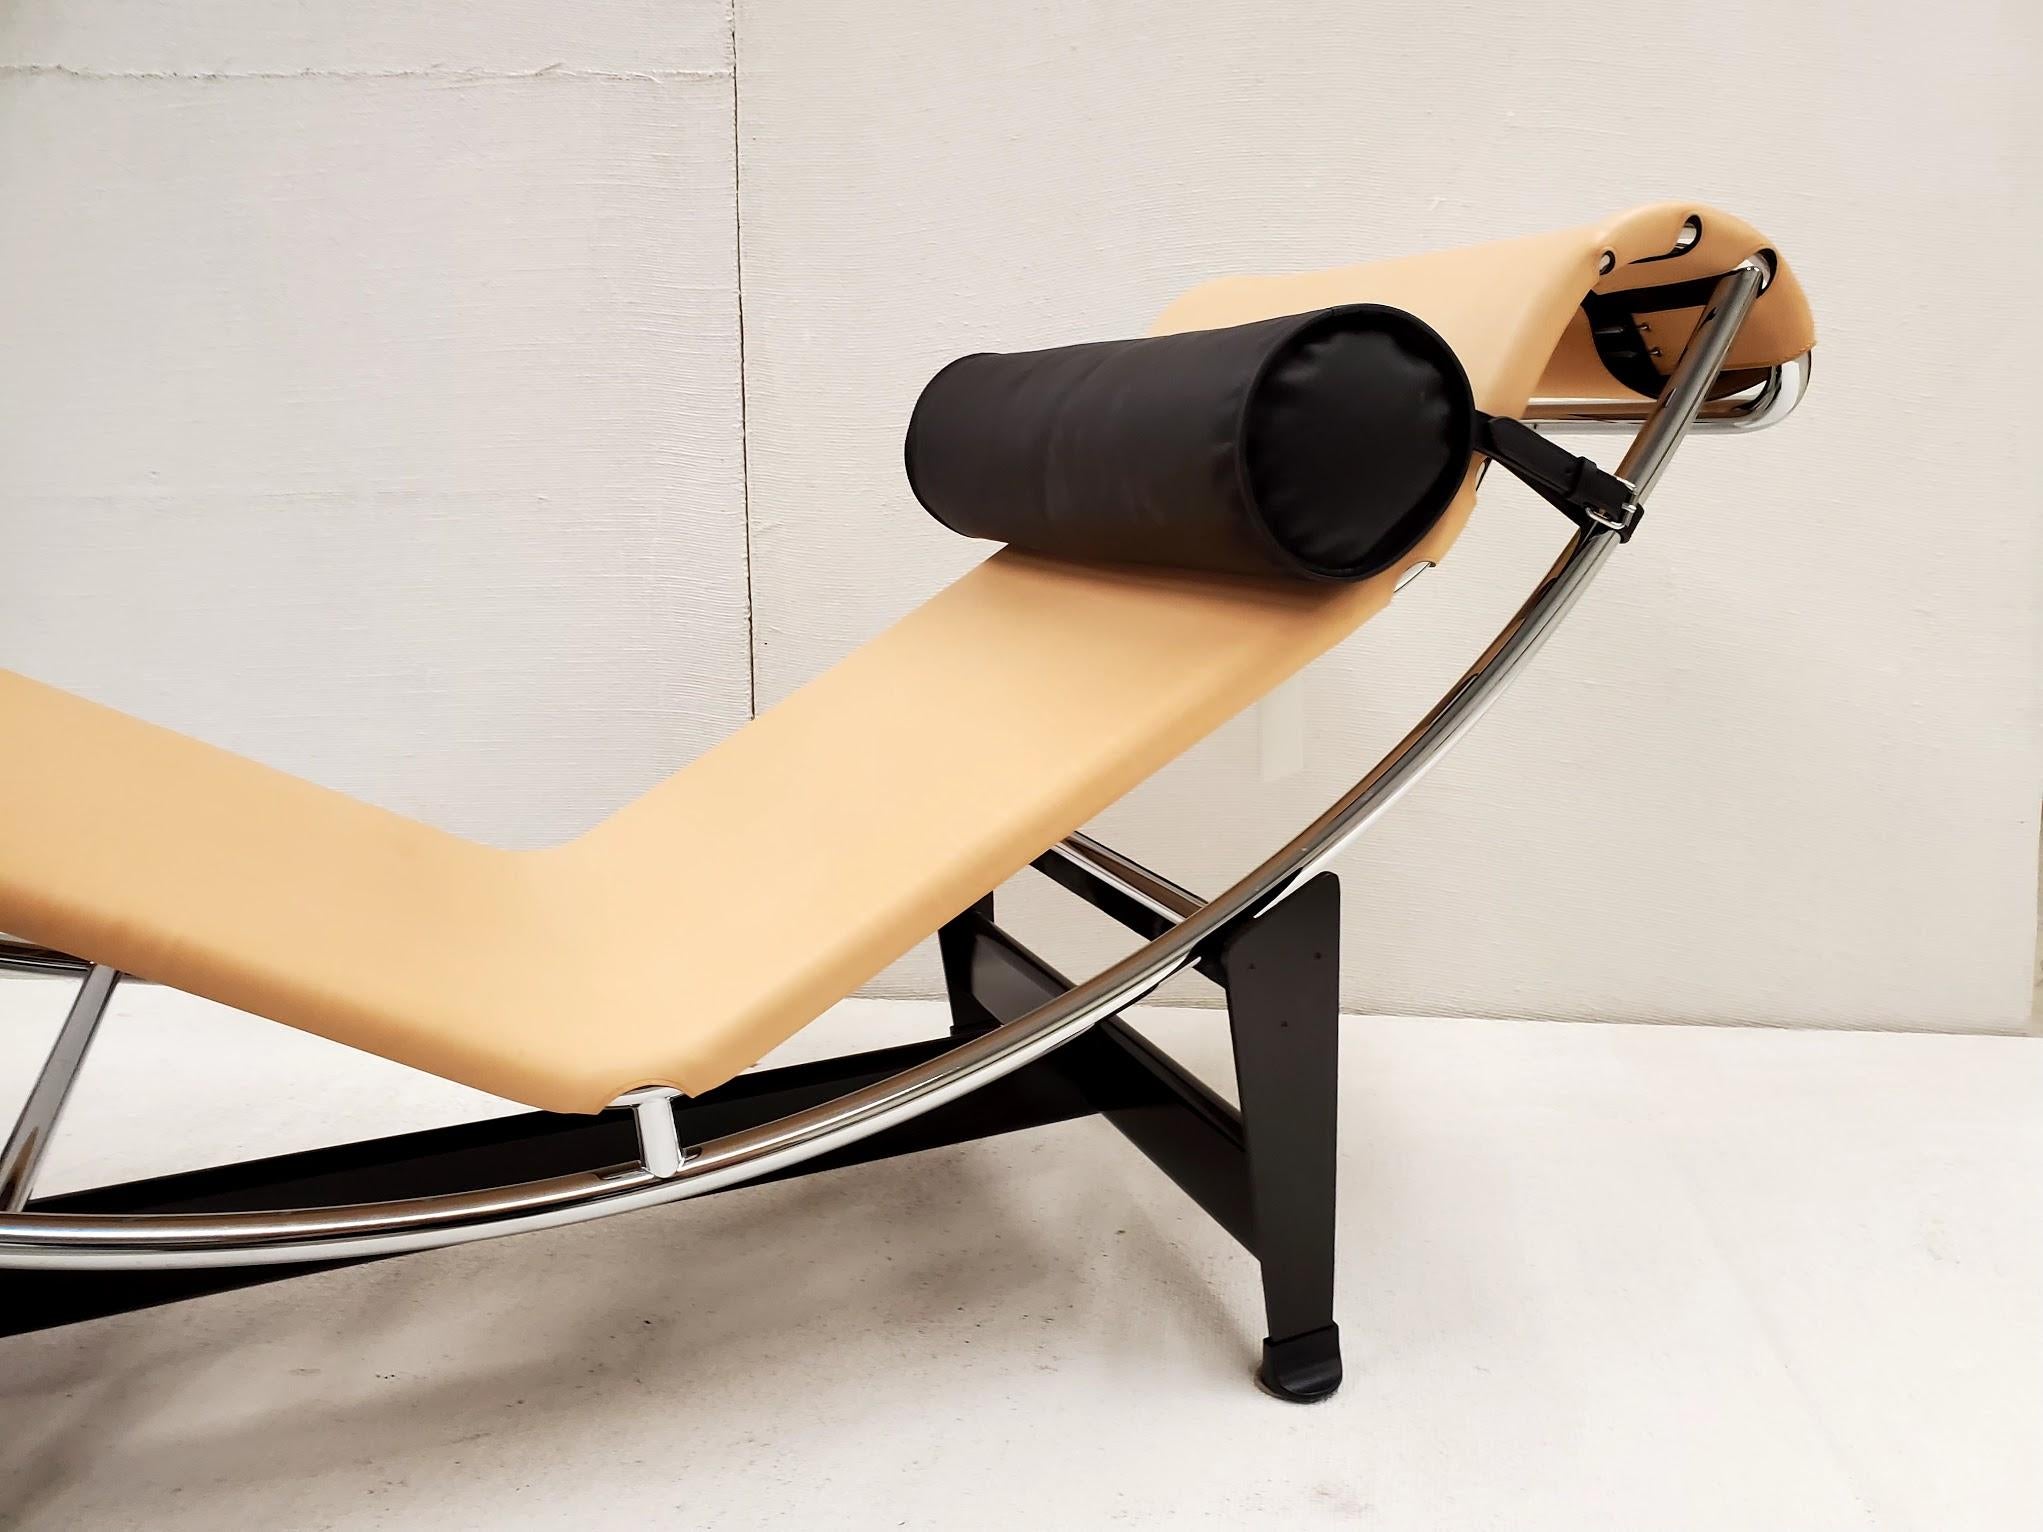 The chaise-longue LC4 CP by Le Corbusier, Pierre Jeanneret, Charlotte Perriand is a homage by Cassina to Charlotte Perriand in the occasion of the 2014 Icon Collection by Louis Vuitton. The limited-edition (1000 pieces) was presented at Design